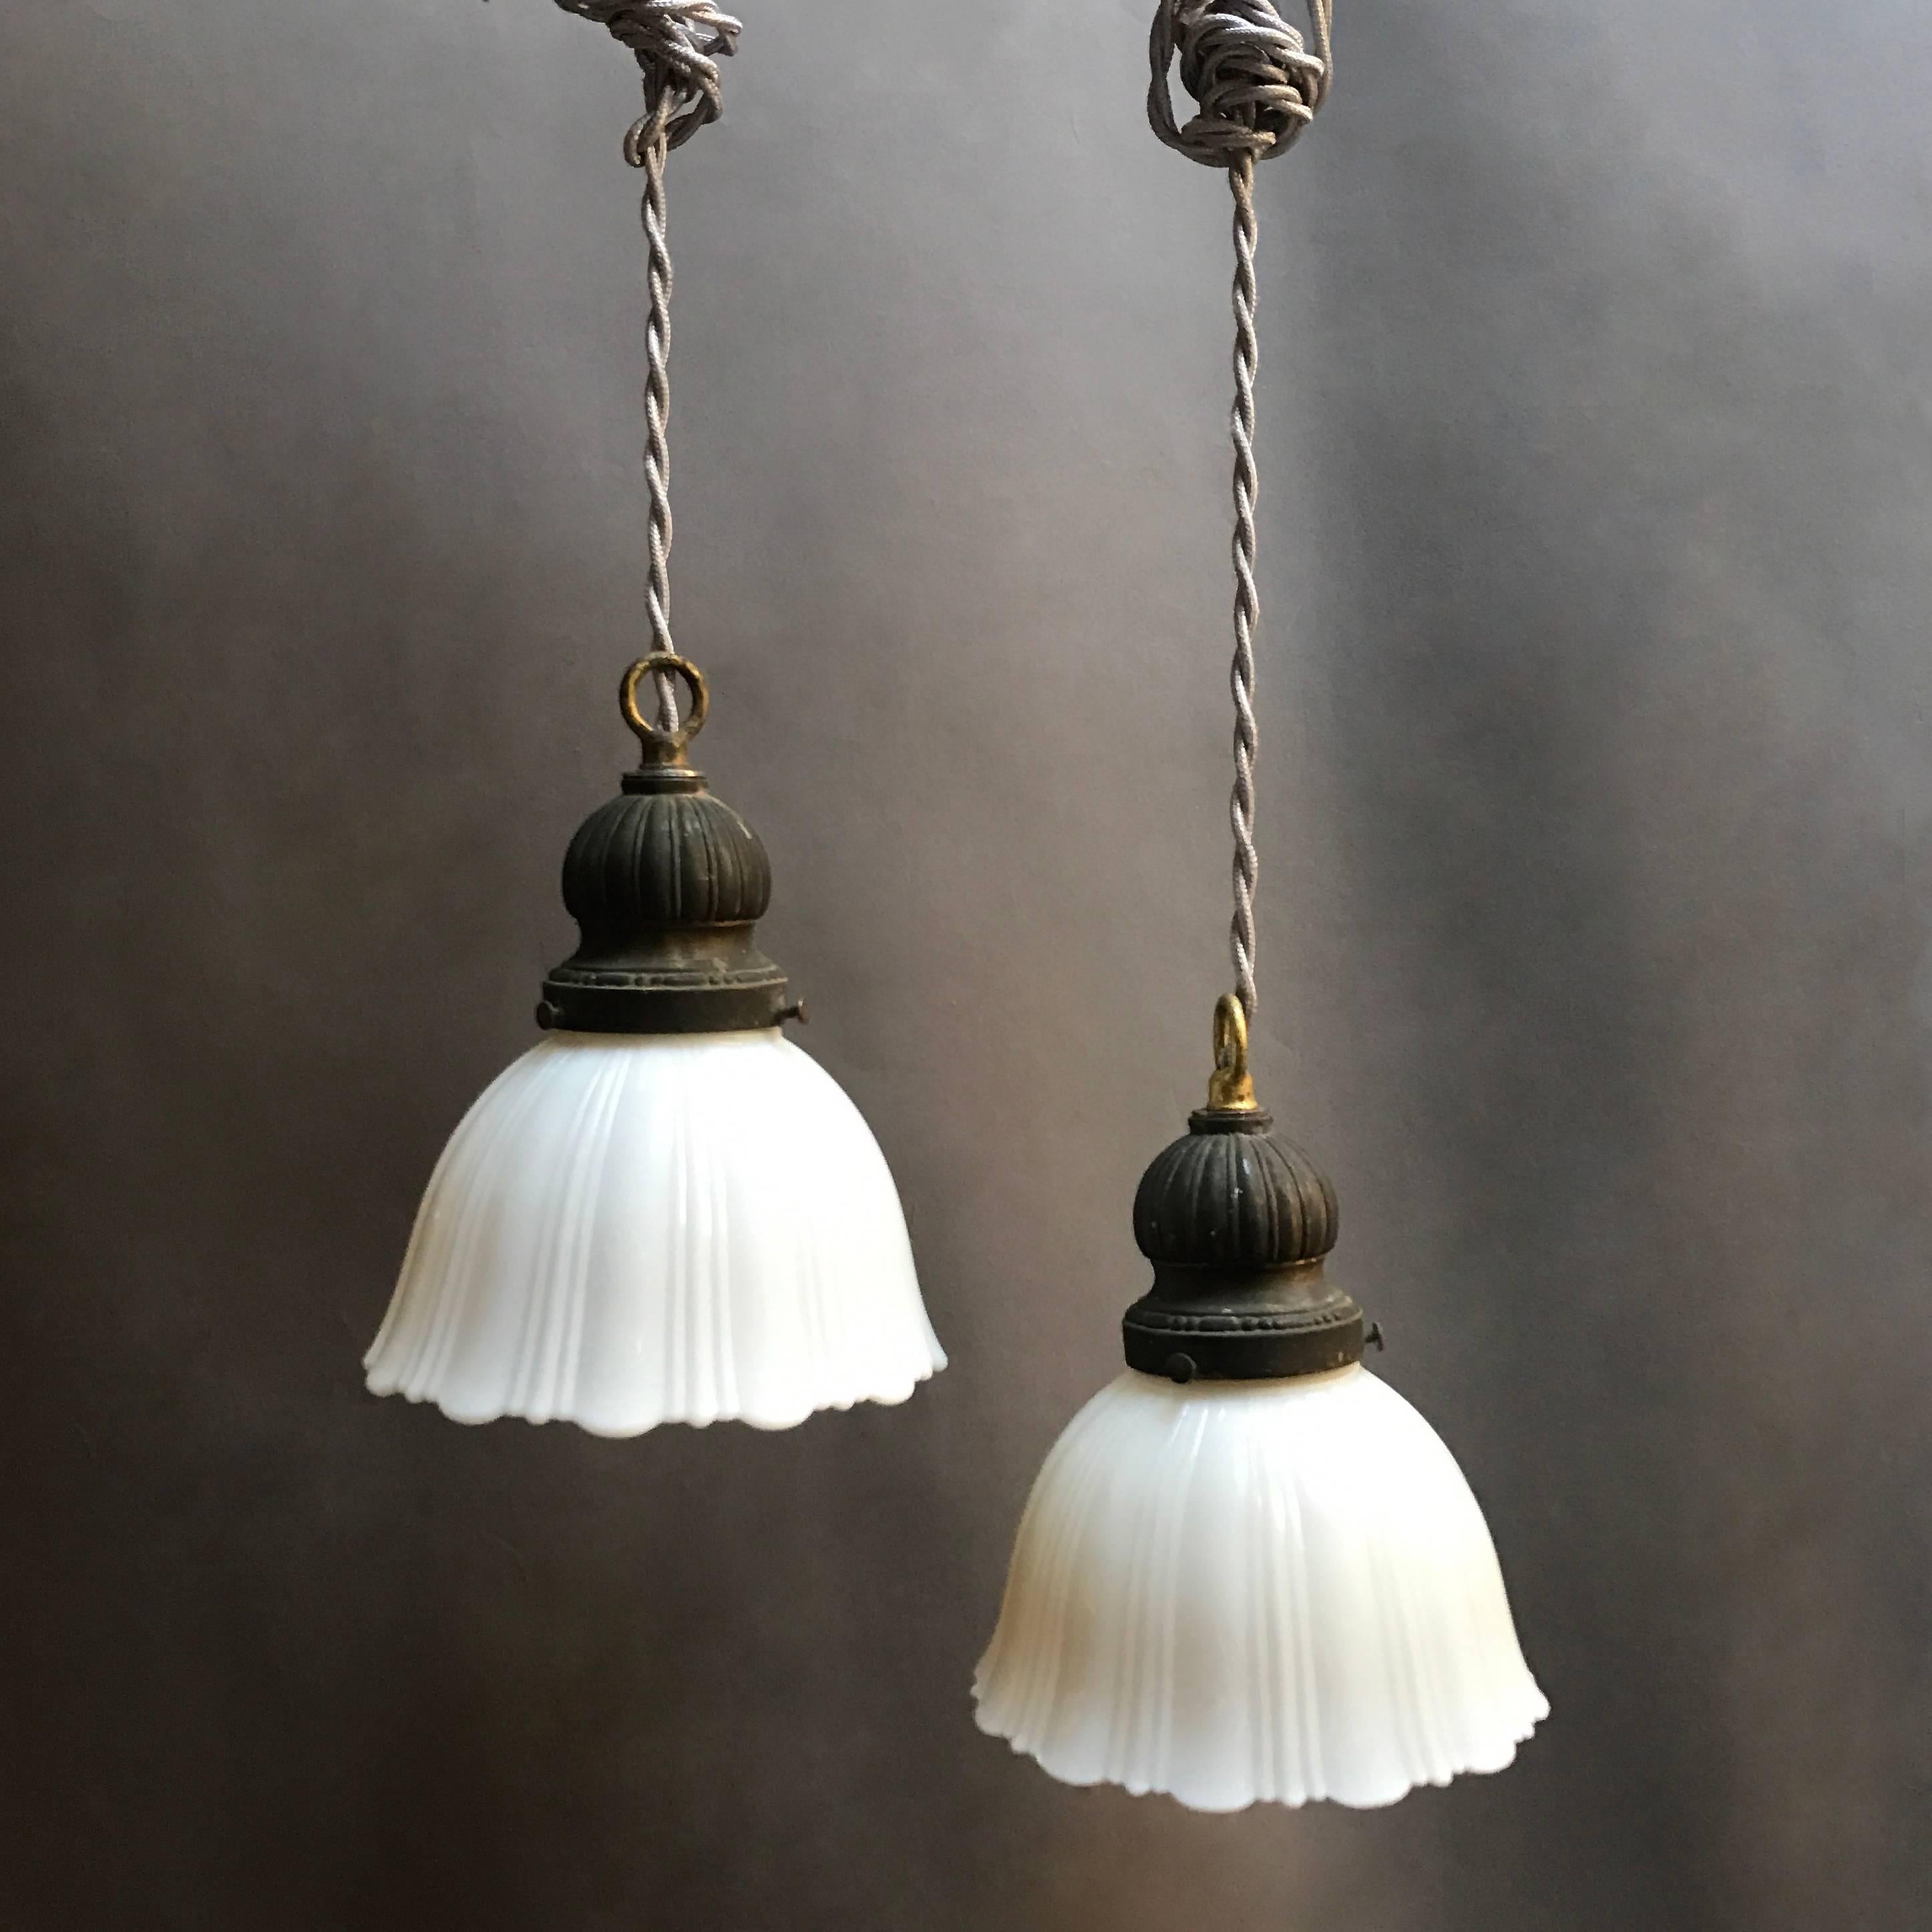 Pair of early 20th century, pendant lights feature fluted milk glass shades with scalloped detail and wonderfully patinated steel fitters are newly wired with 36 inches of gray braided cloth cord to accept up to 200 watts each.